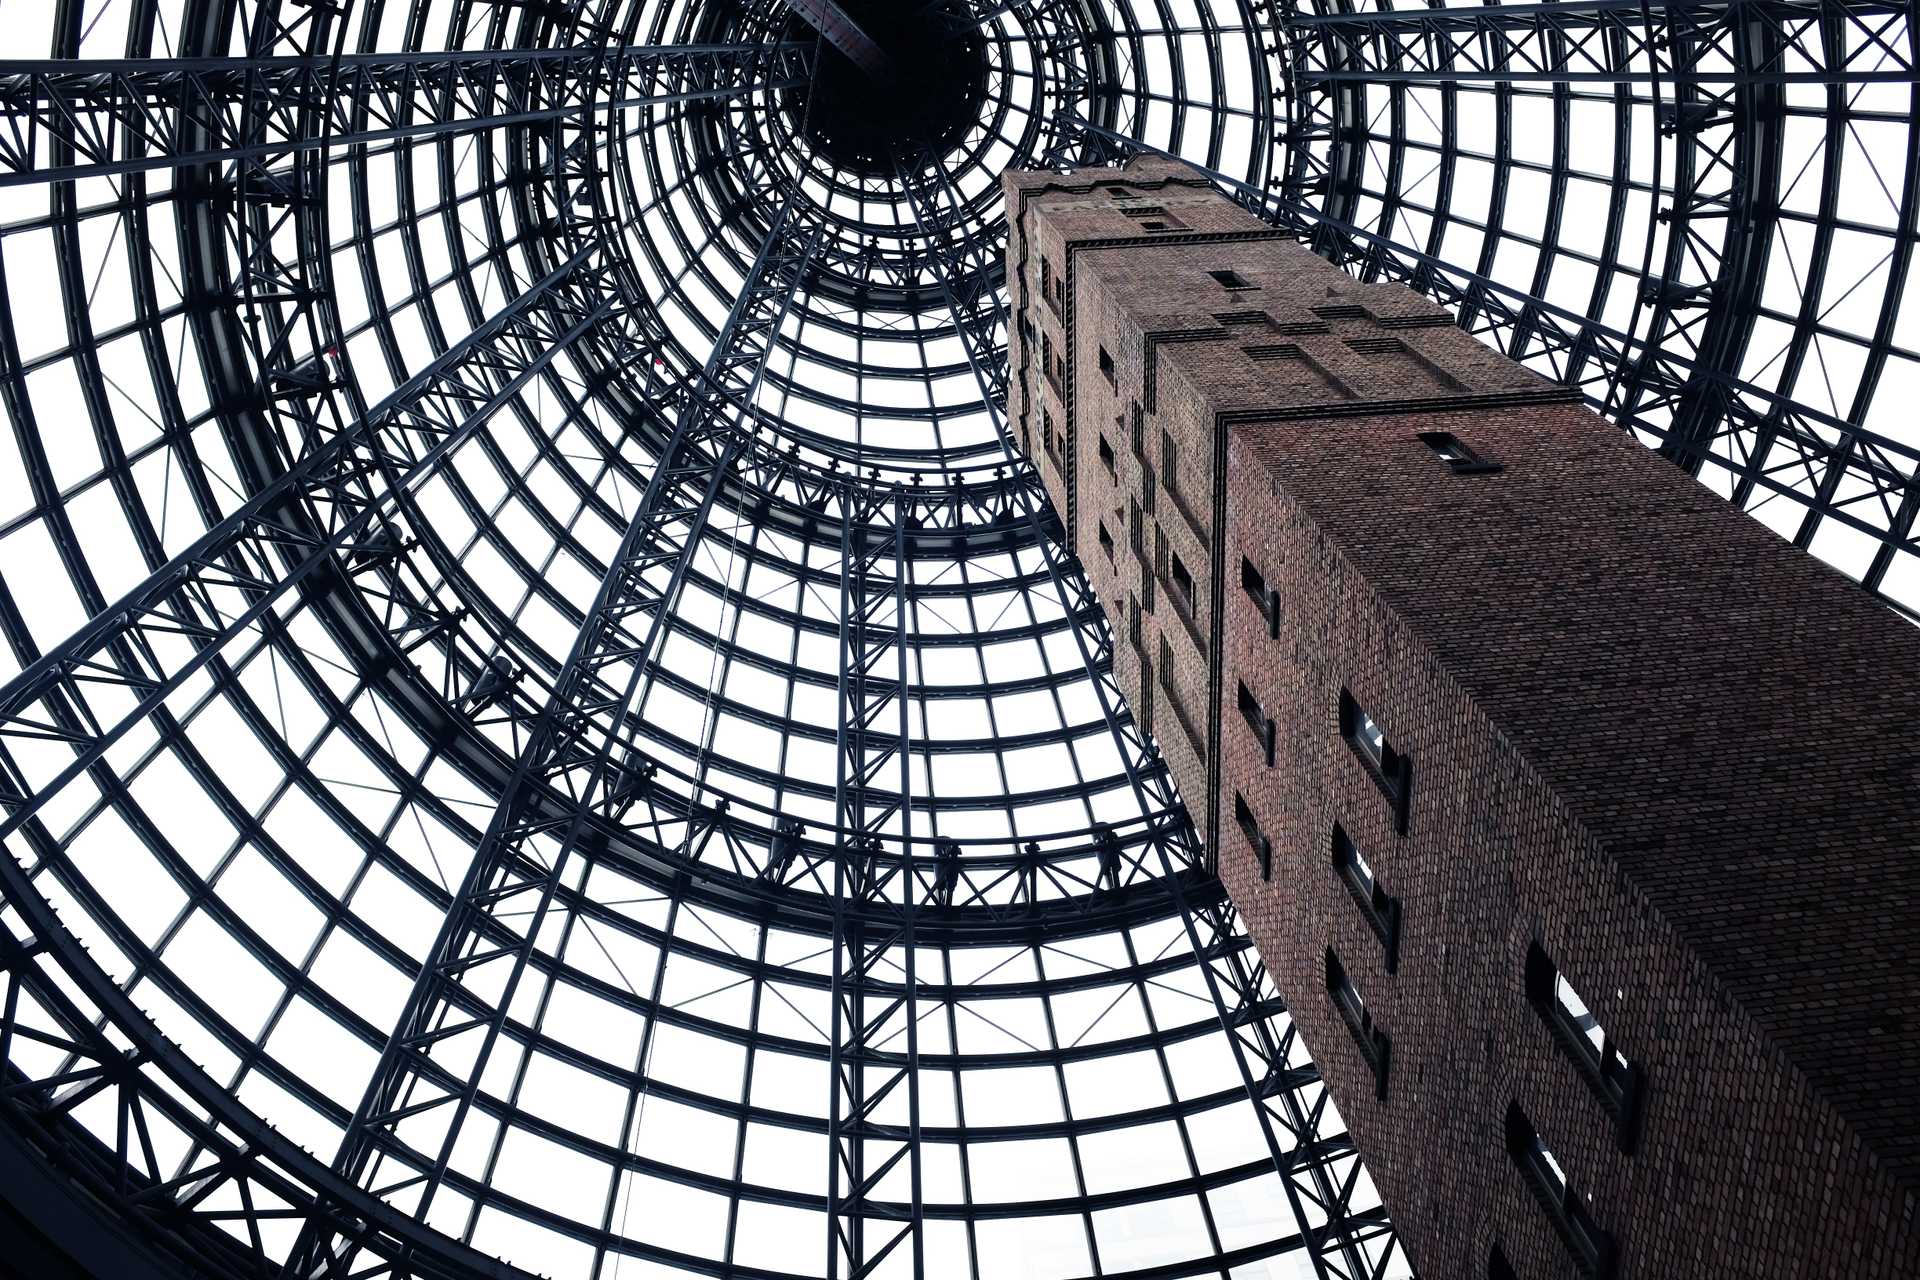 A brick tower in Melbourne, Australia grows beneath a metal frame.